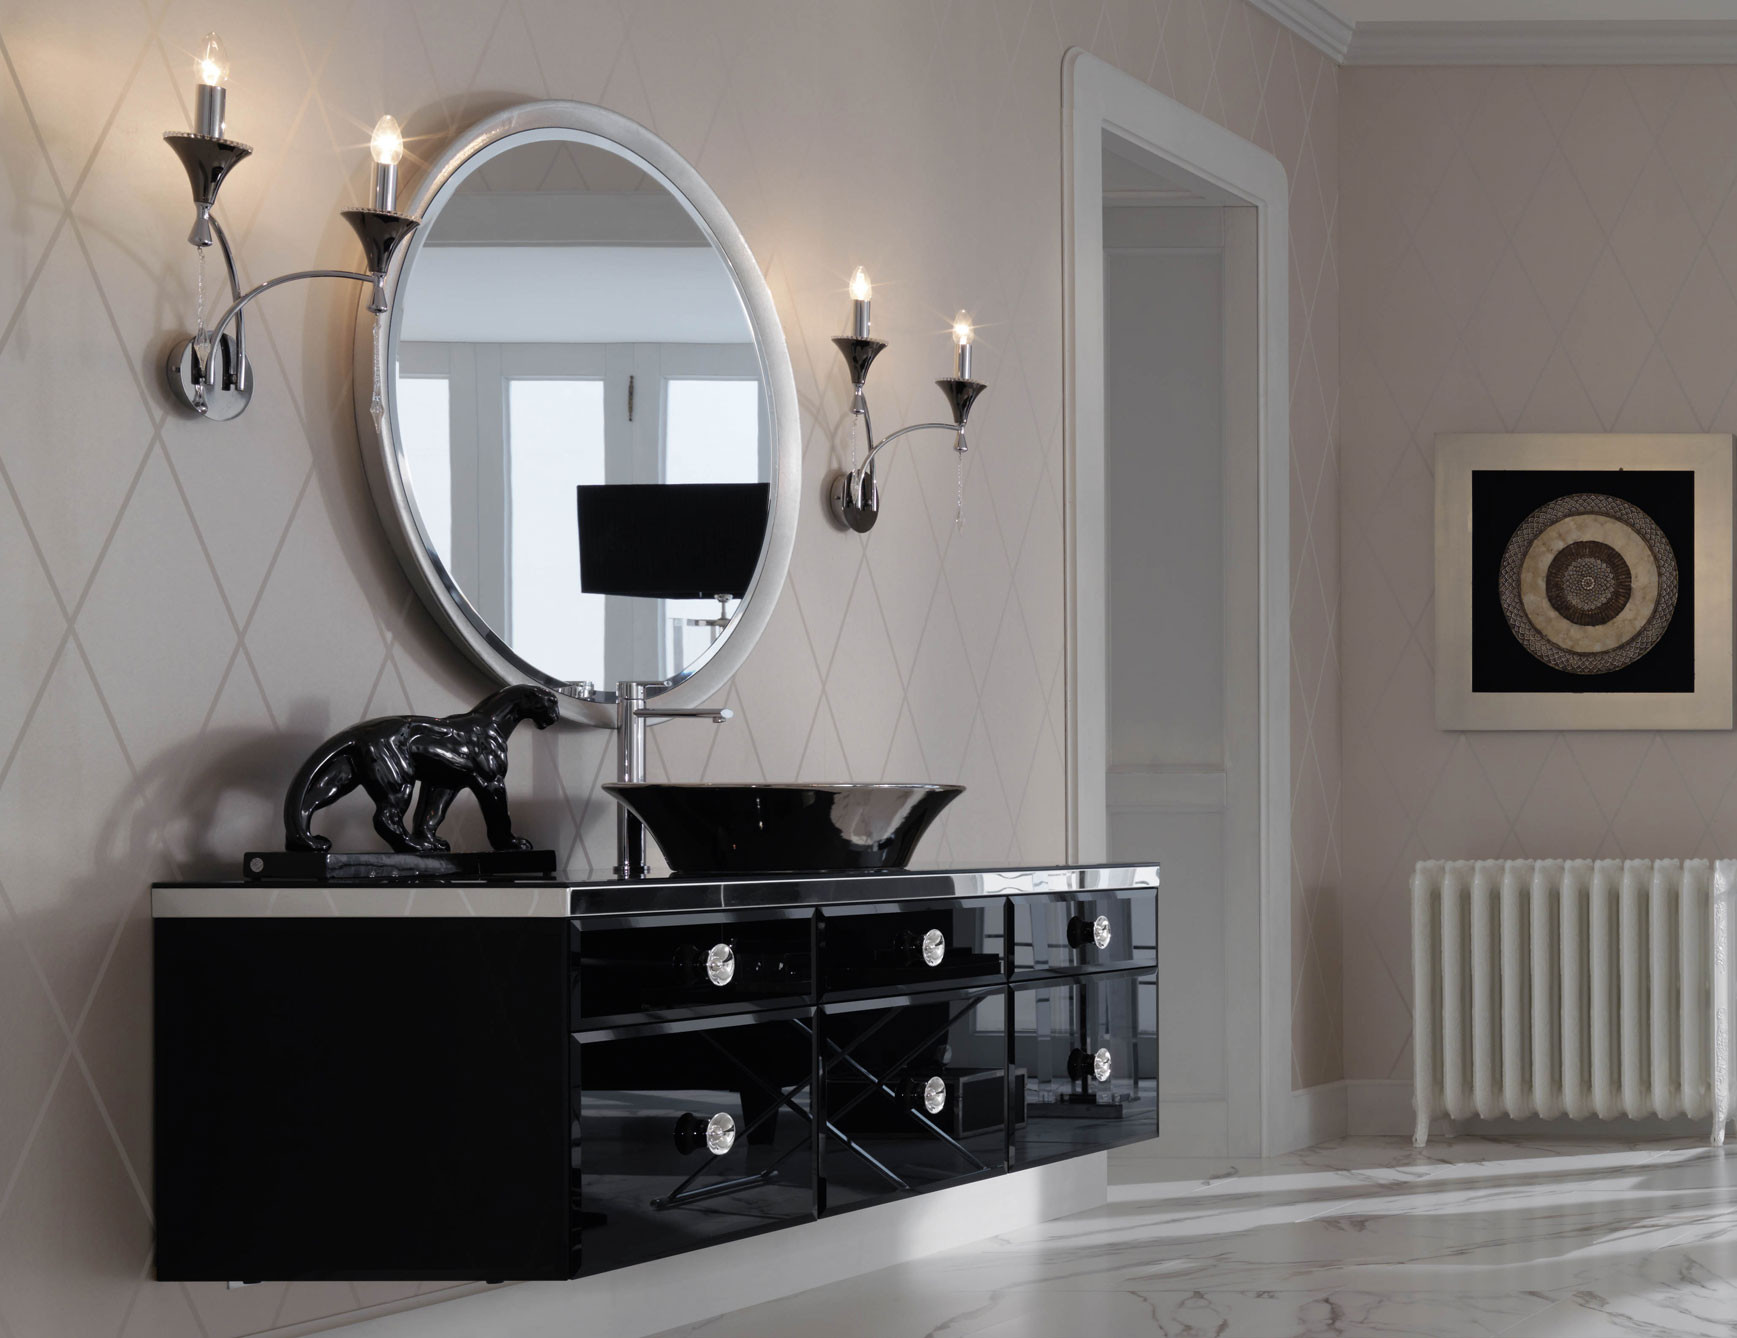 High End Bathroom Vanities
 Milldue Majestic 23 Black Lacquered Glass High End Italian